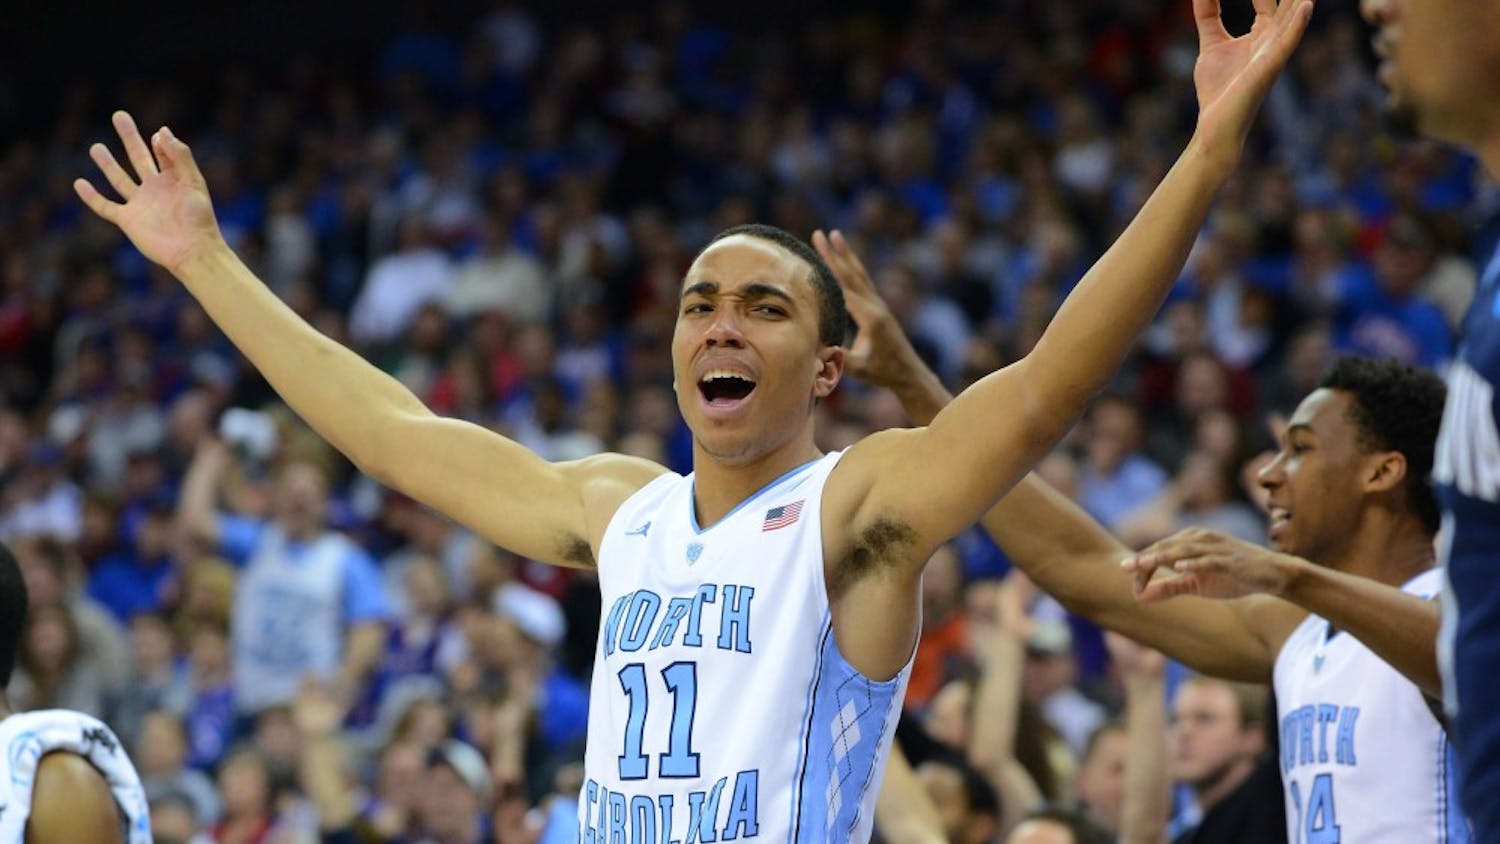 Brice Johnson (11) reacts after a 3-point basket late in the 2nd half.